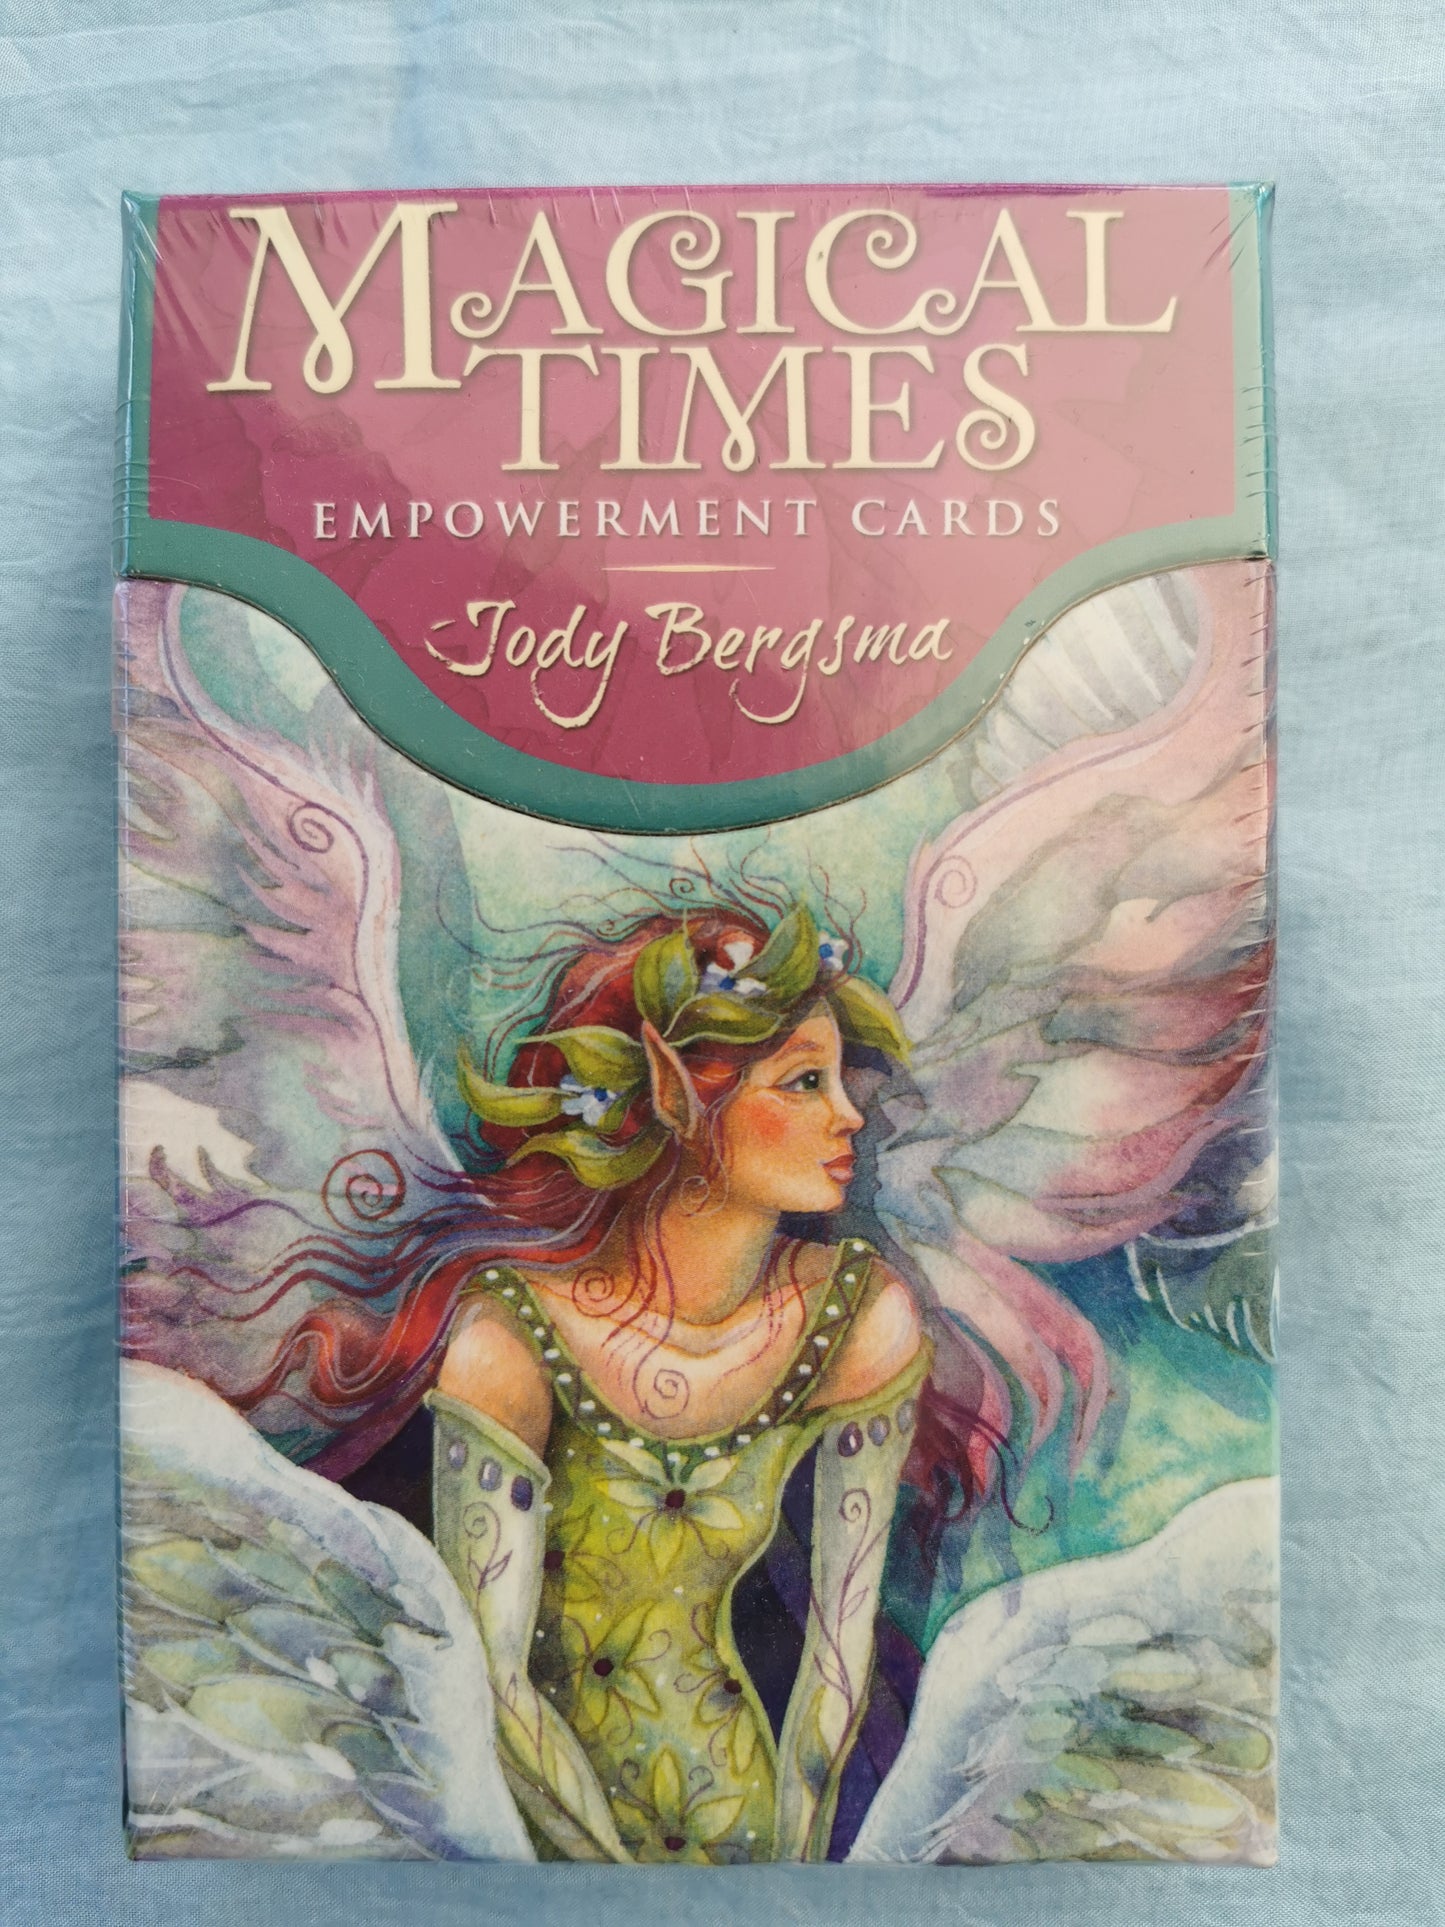 Magical Times - Empowerment Cards